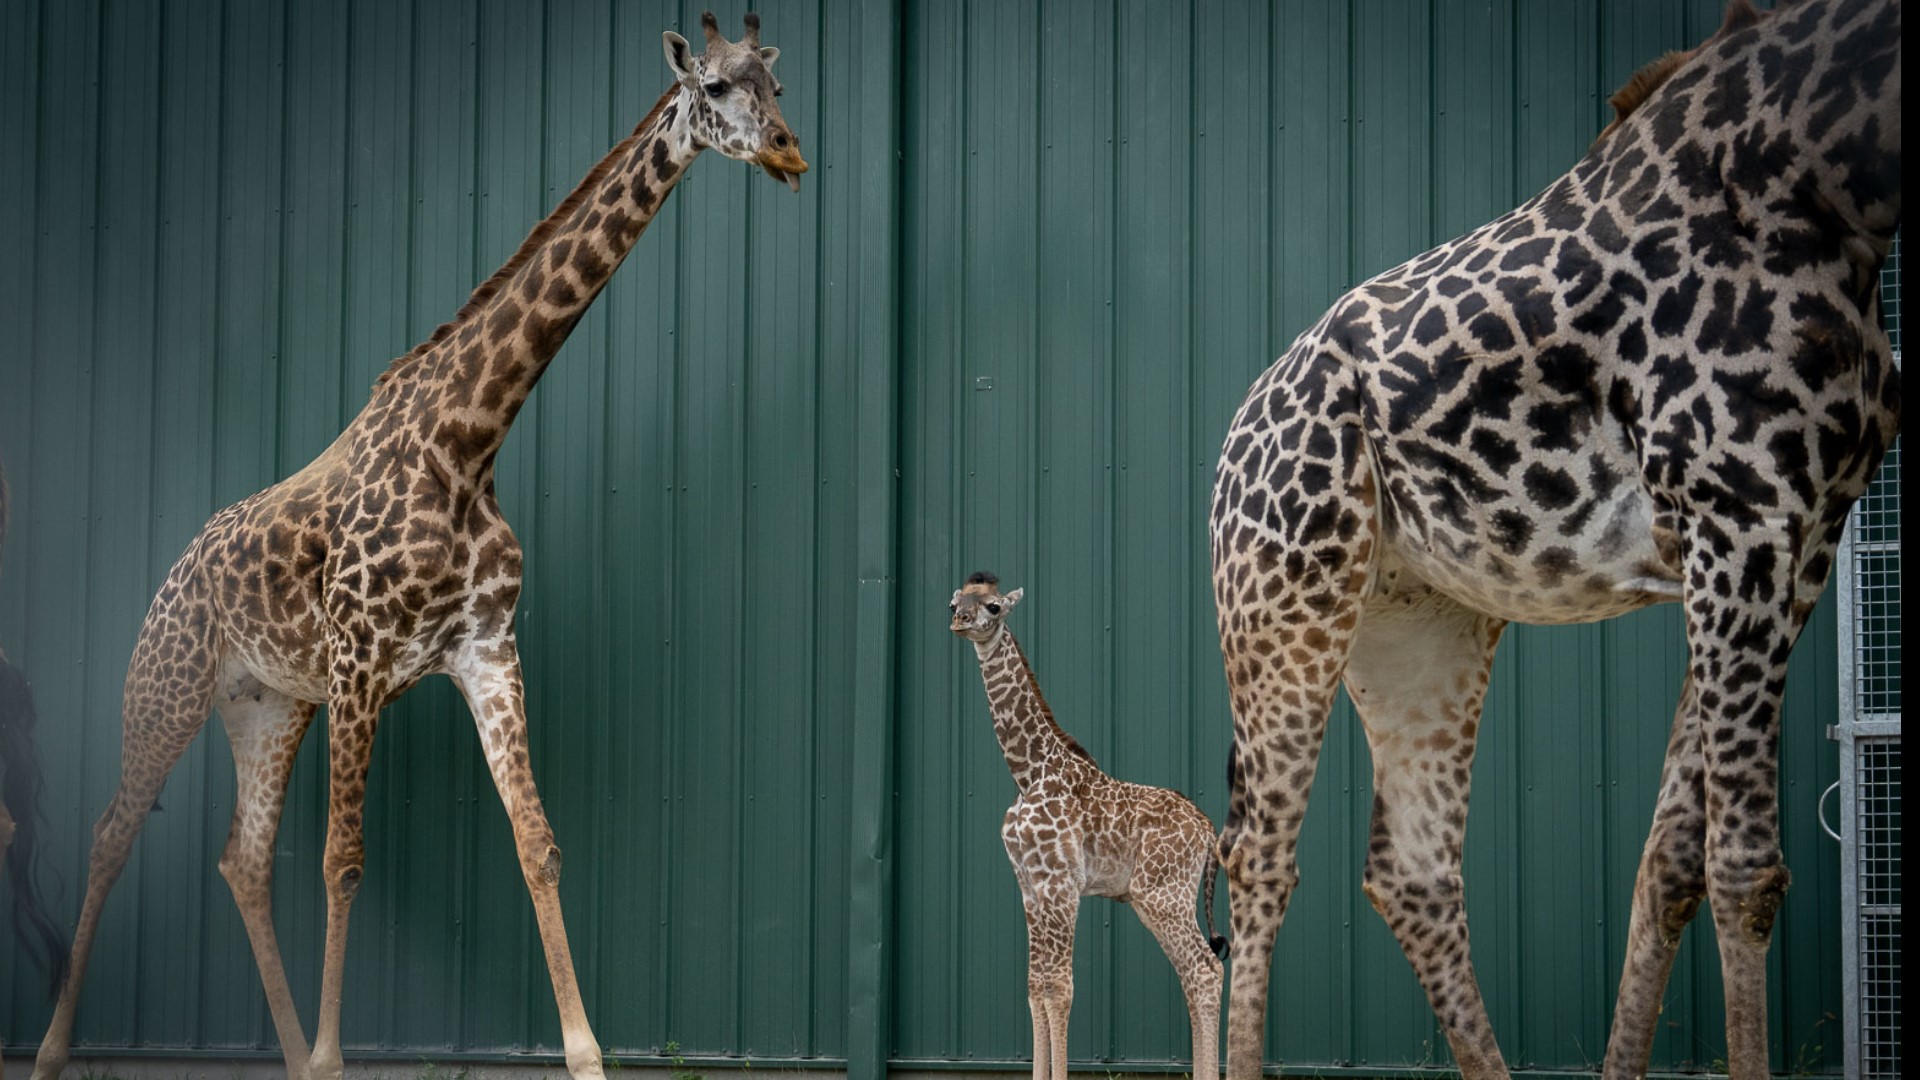 The Columbus Zoo and Aquarium are keeping the giraffe calf and his mom, Zuri, behind closed doors while they bond.